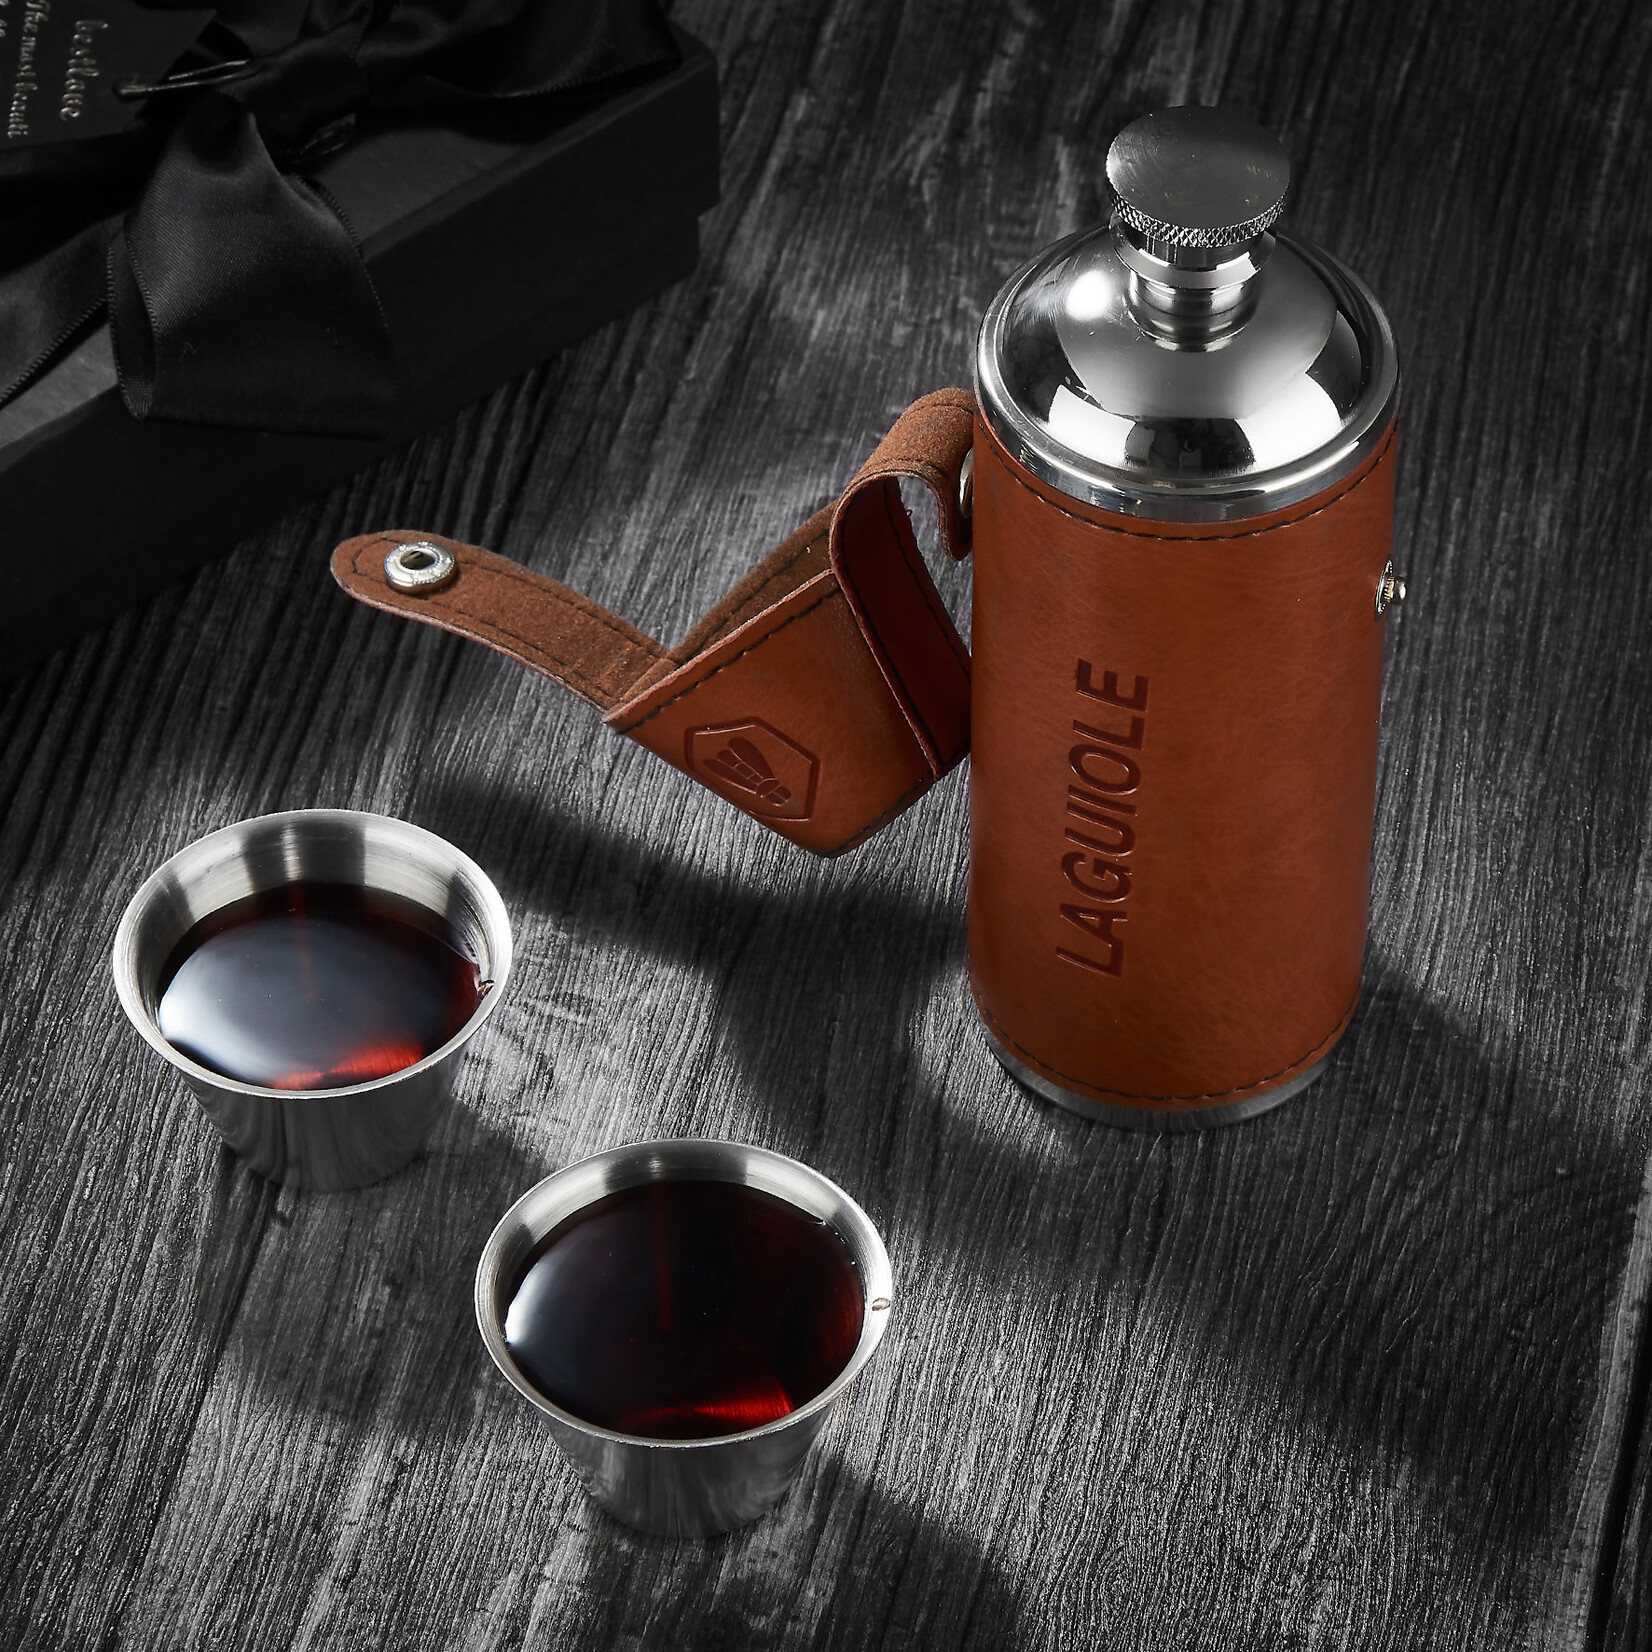 Laguiole Hipflask with 2 cups